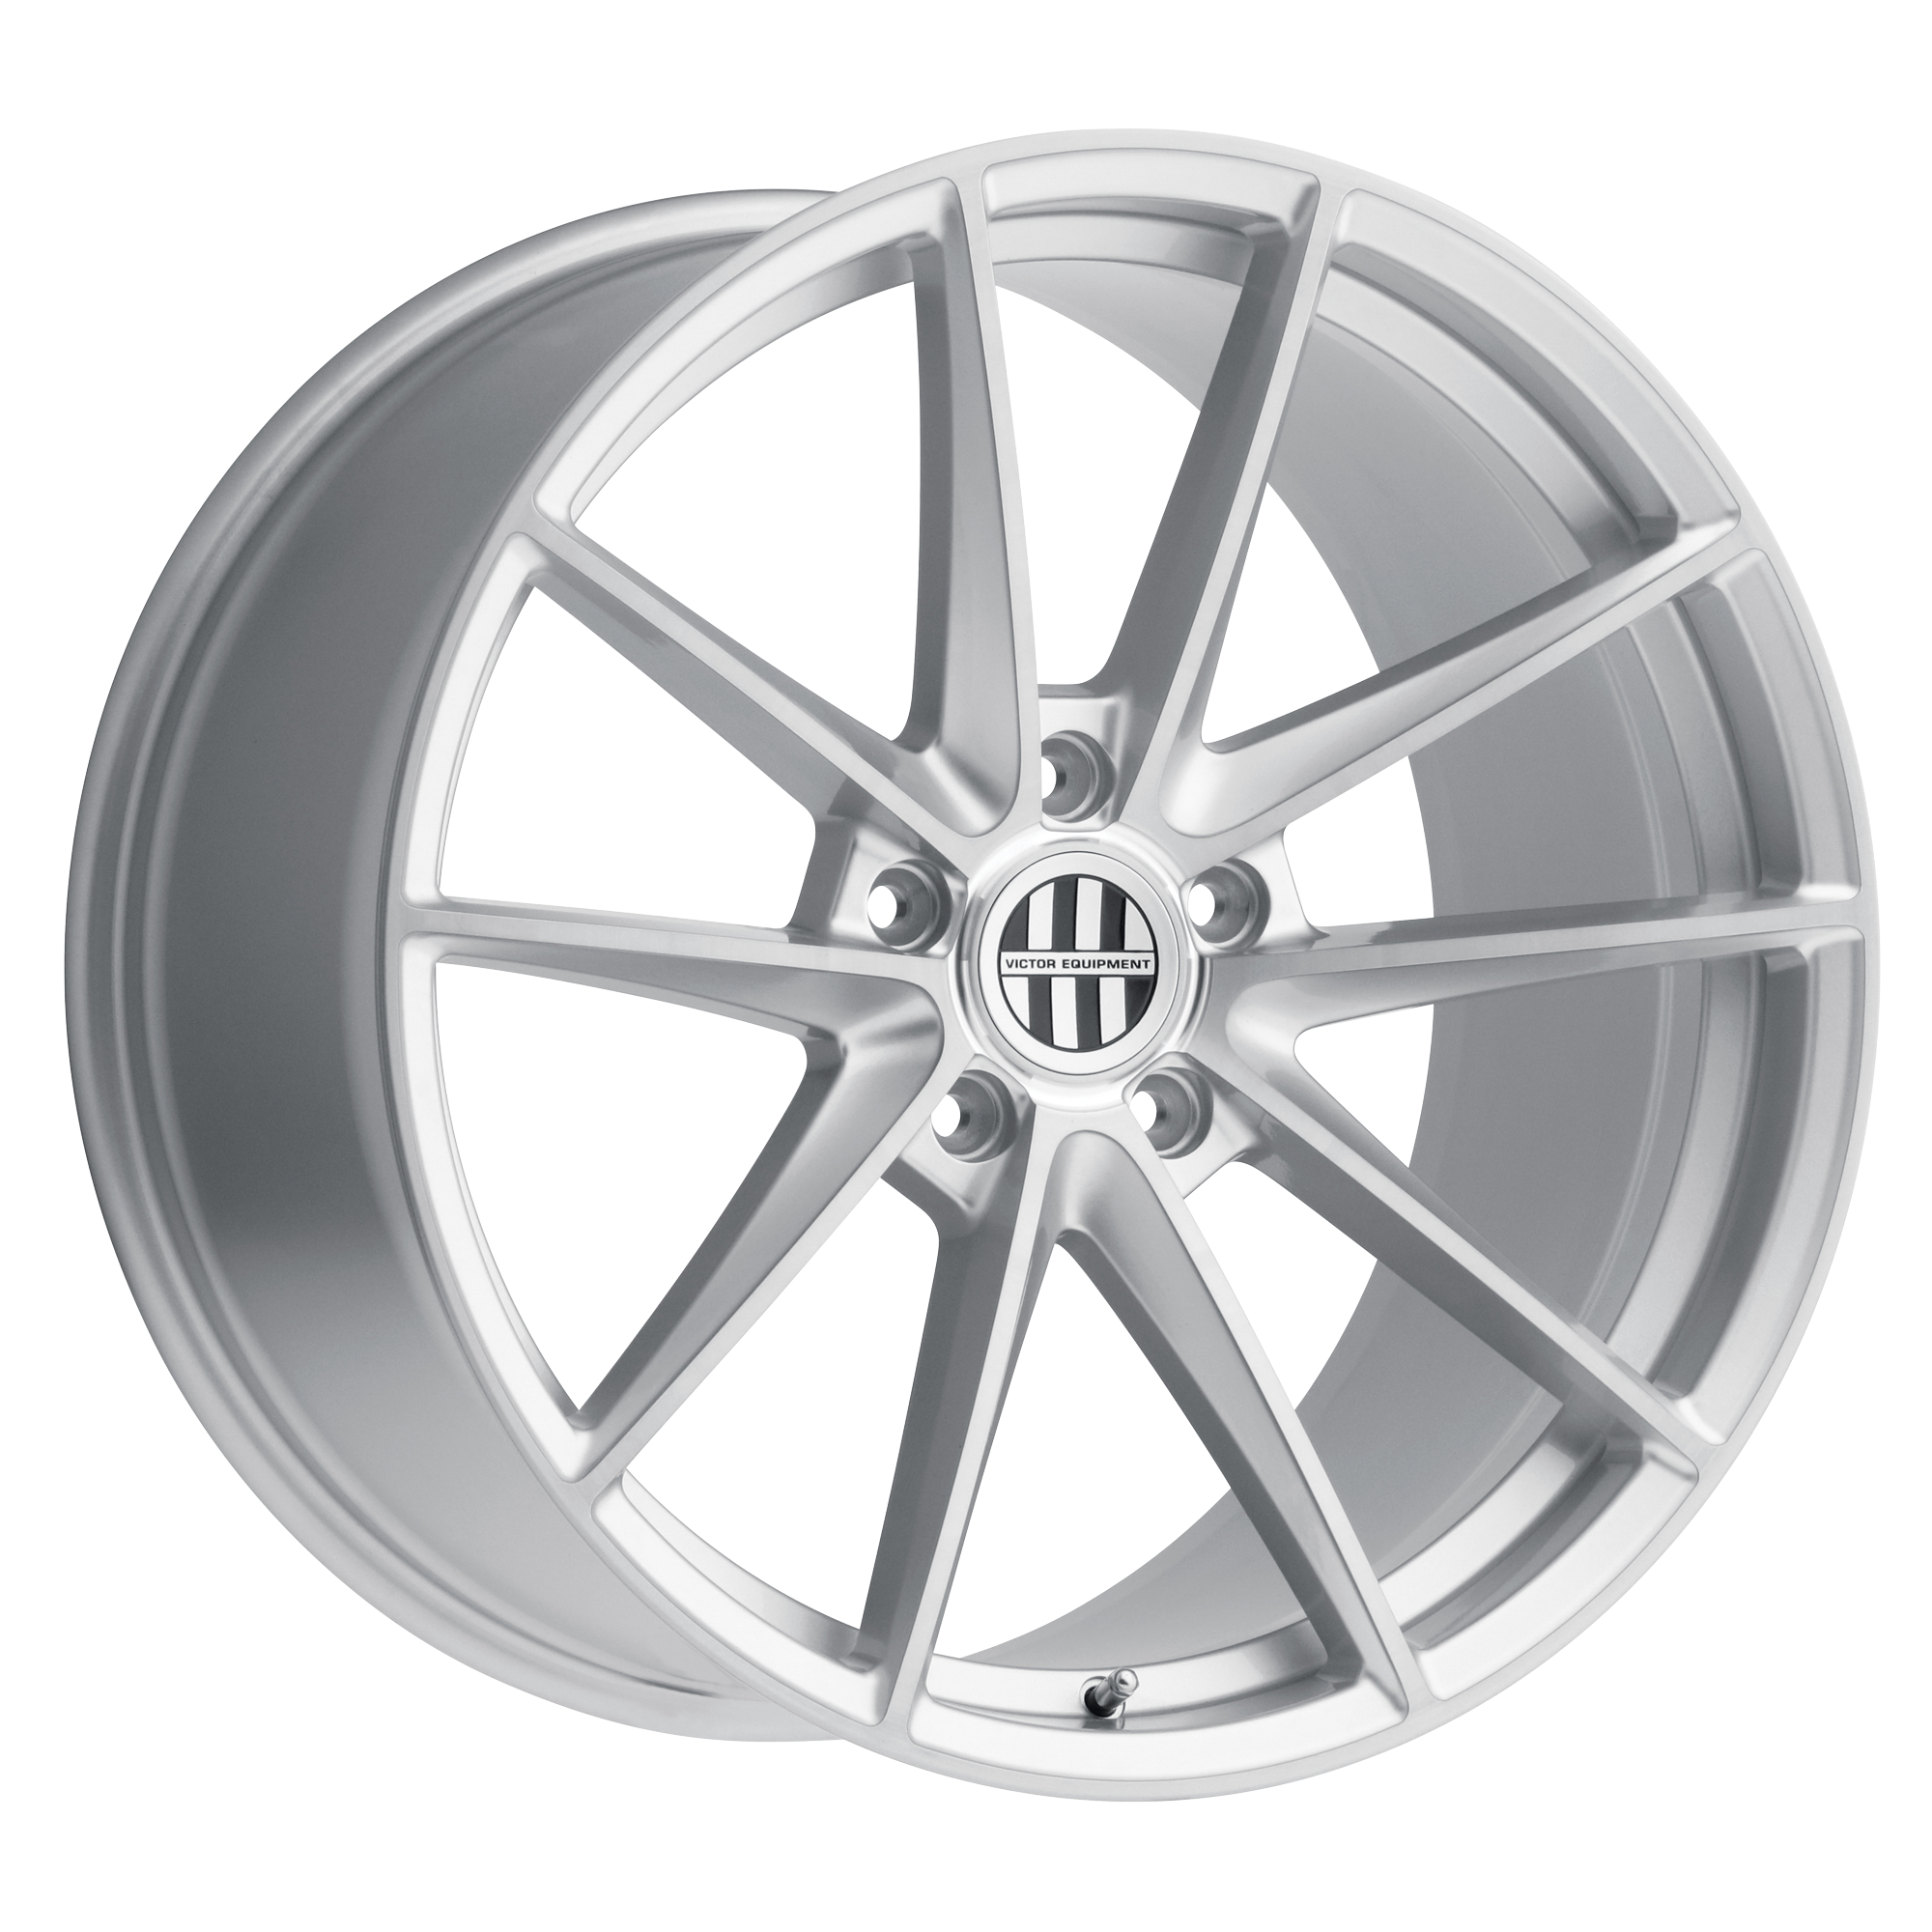 VICTOR EQUIPMENT ZUFFEN SILVER W/ BRUSHED FACE WHEELS | 18X10.5 | 5X130 | OFFSET: 55MM | CB: 71.5MM